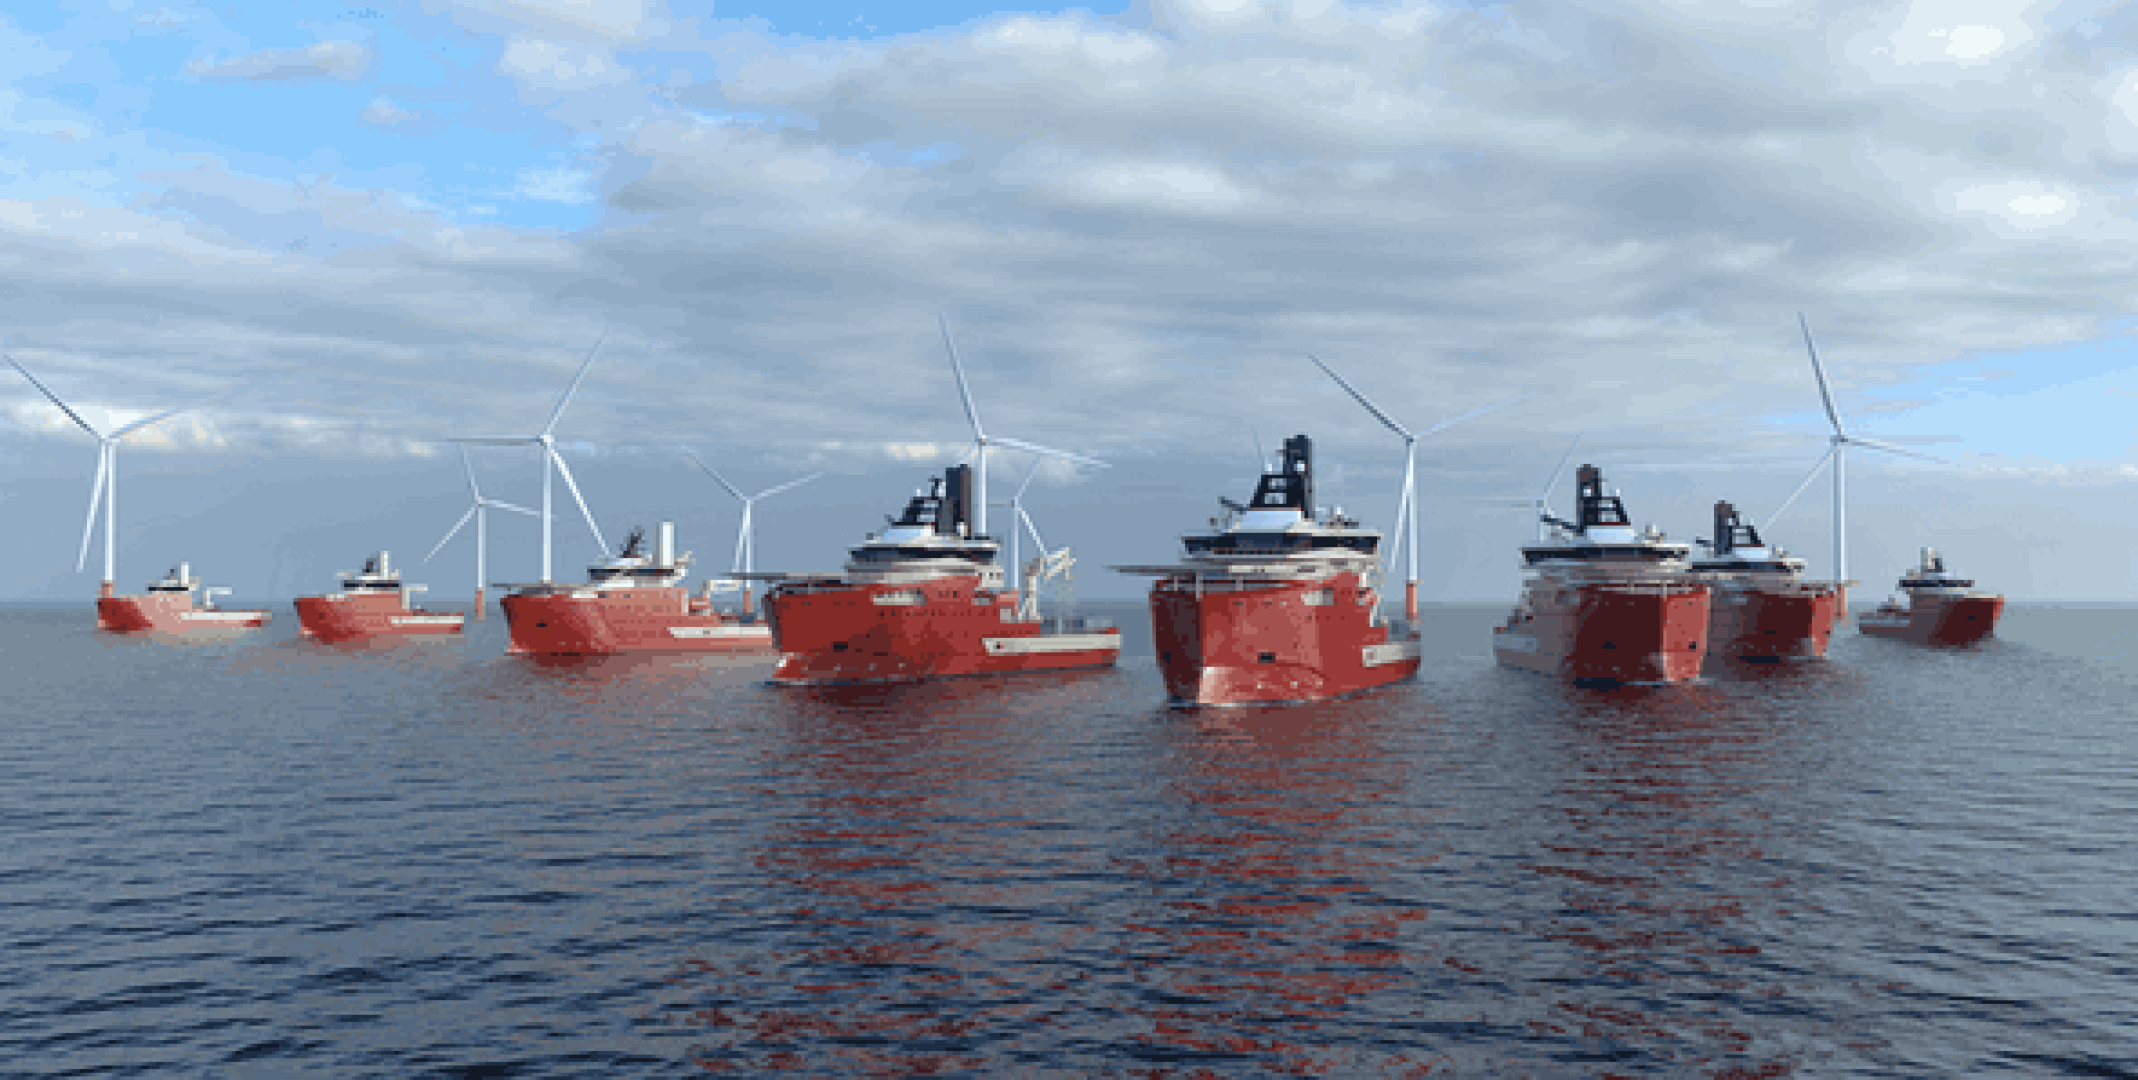 Fincantieri: Vard will build two further ships for the Offshore wind market